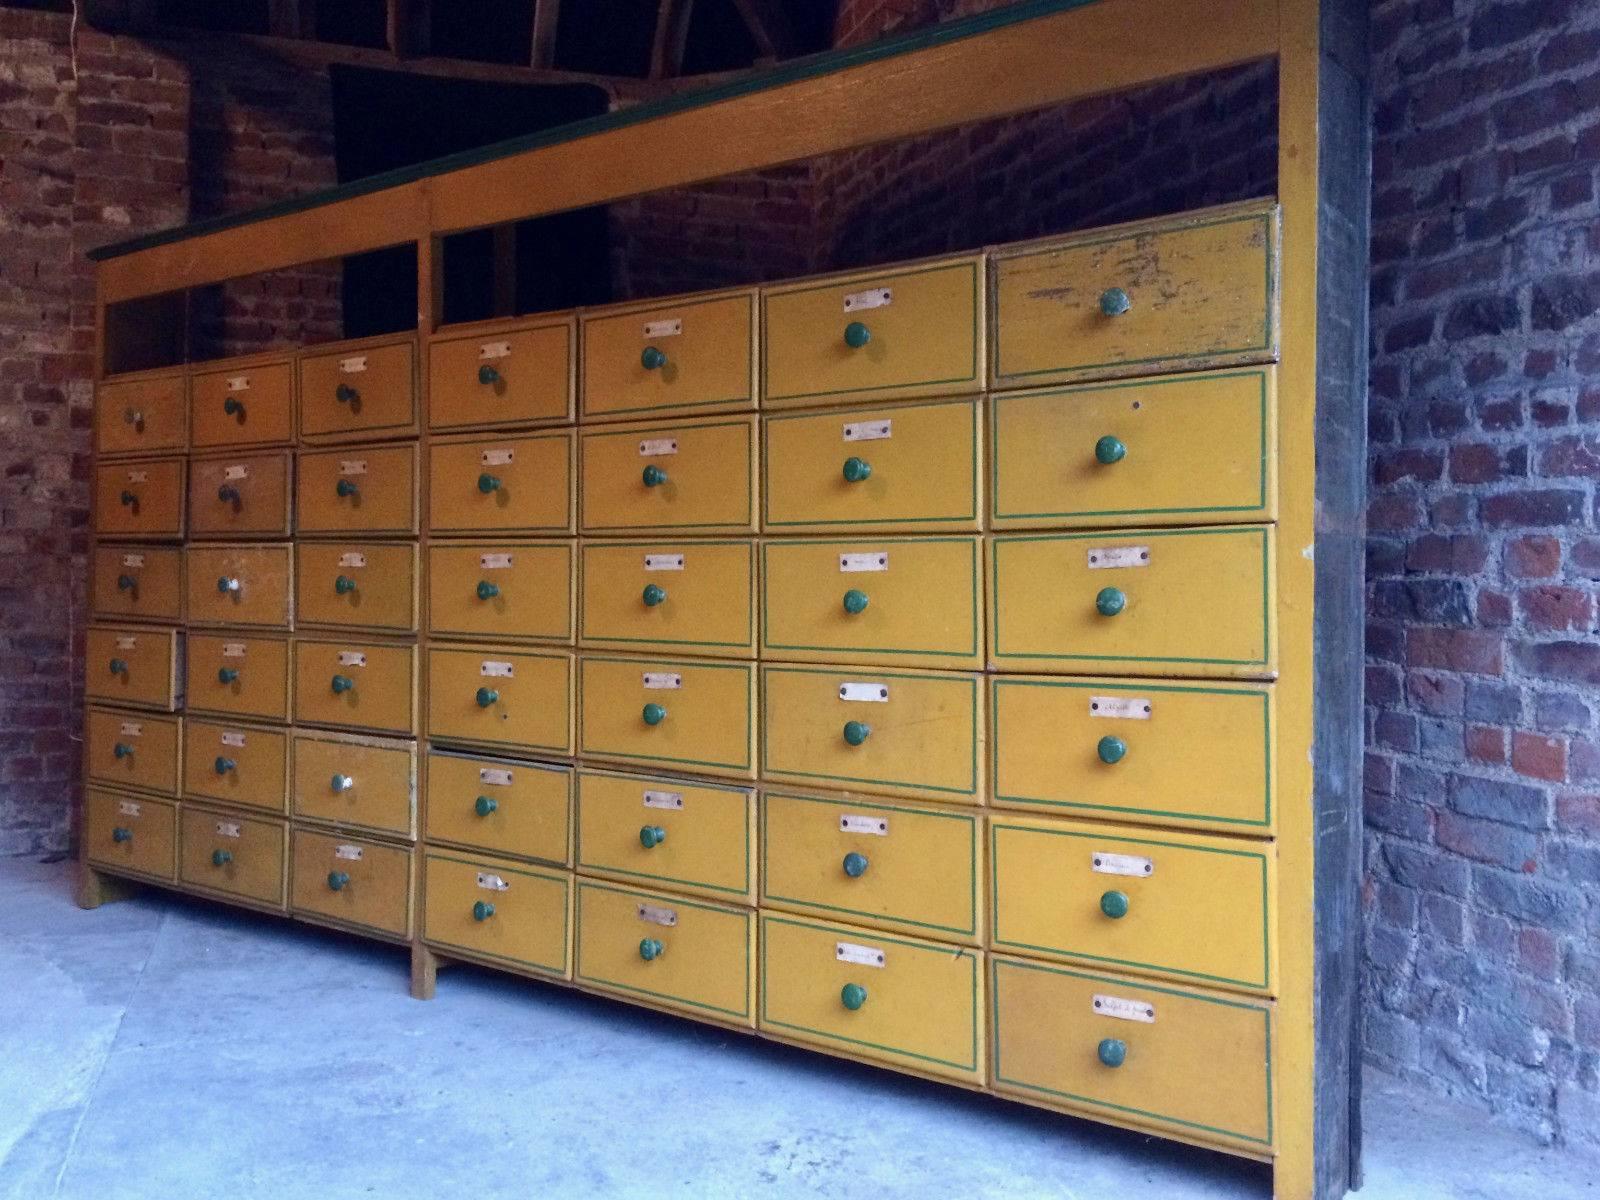 A stunningly beautiful early 20th century pine yellow and green French painted 'Seed
Merchants' haberdashery cabinet, with a total of 42 drawers, all with green knob
handles and original captain's labels. The haberdashery standing on four block